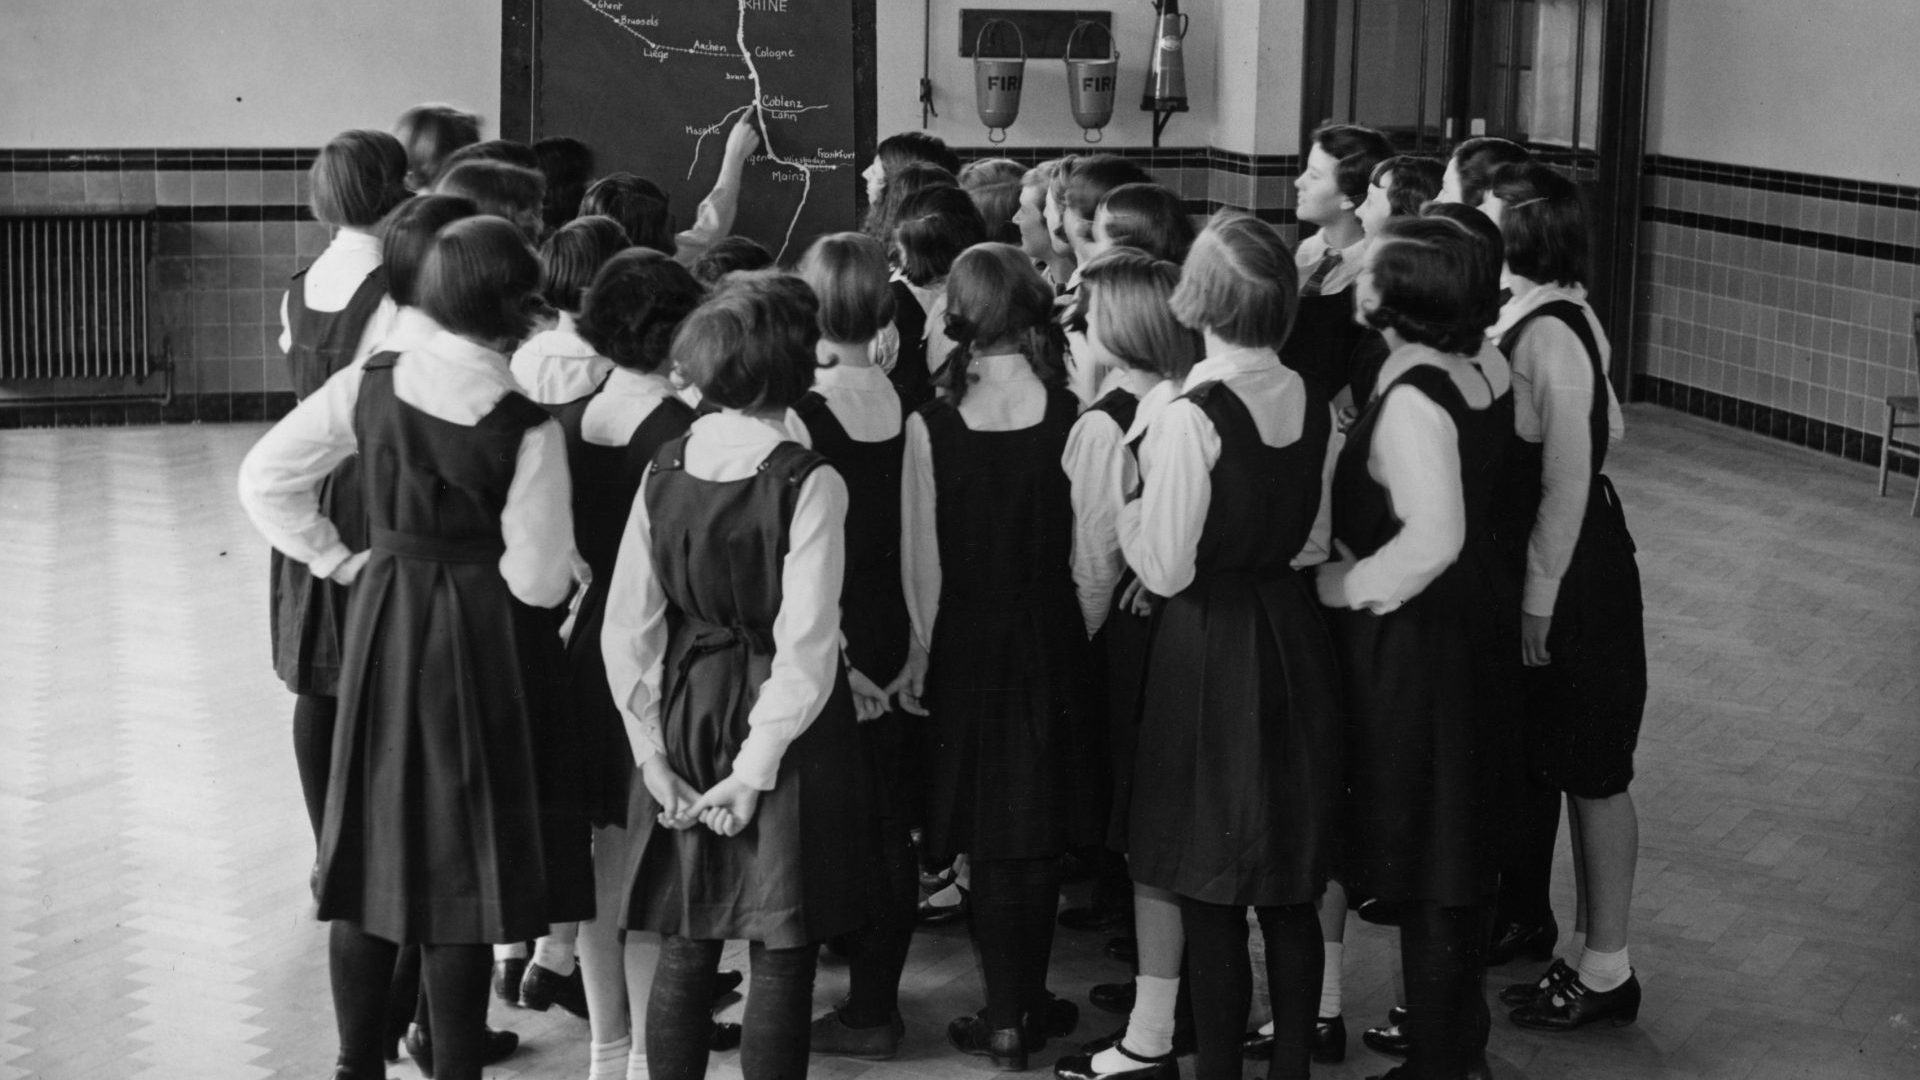 Schoolgirls from the Orange Hill Grammar School in north London study a map of the Rhineland before their Easter trip to Germany, 1936. School exchange programmes are now in jeopardy due to Brexit and the government’s insistence that EU students must hold a passport to enter the UK. Photo: A Hudson/ Topical Press Agency/Getty